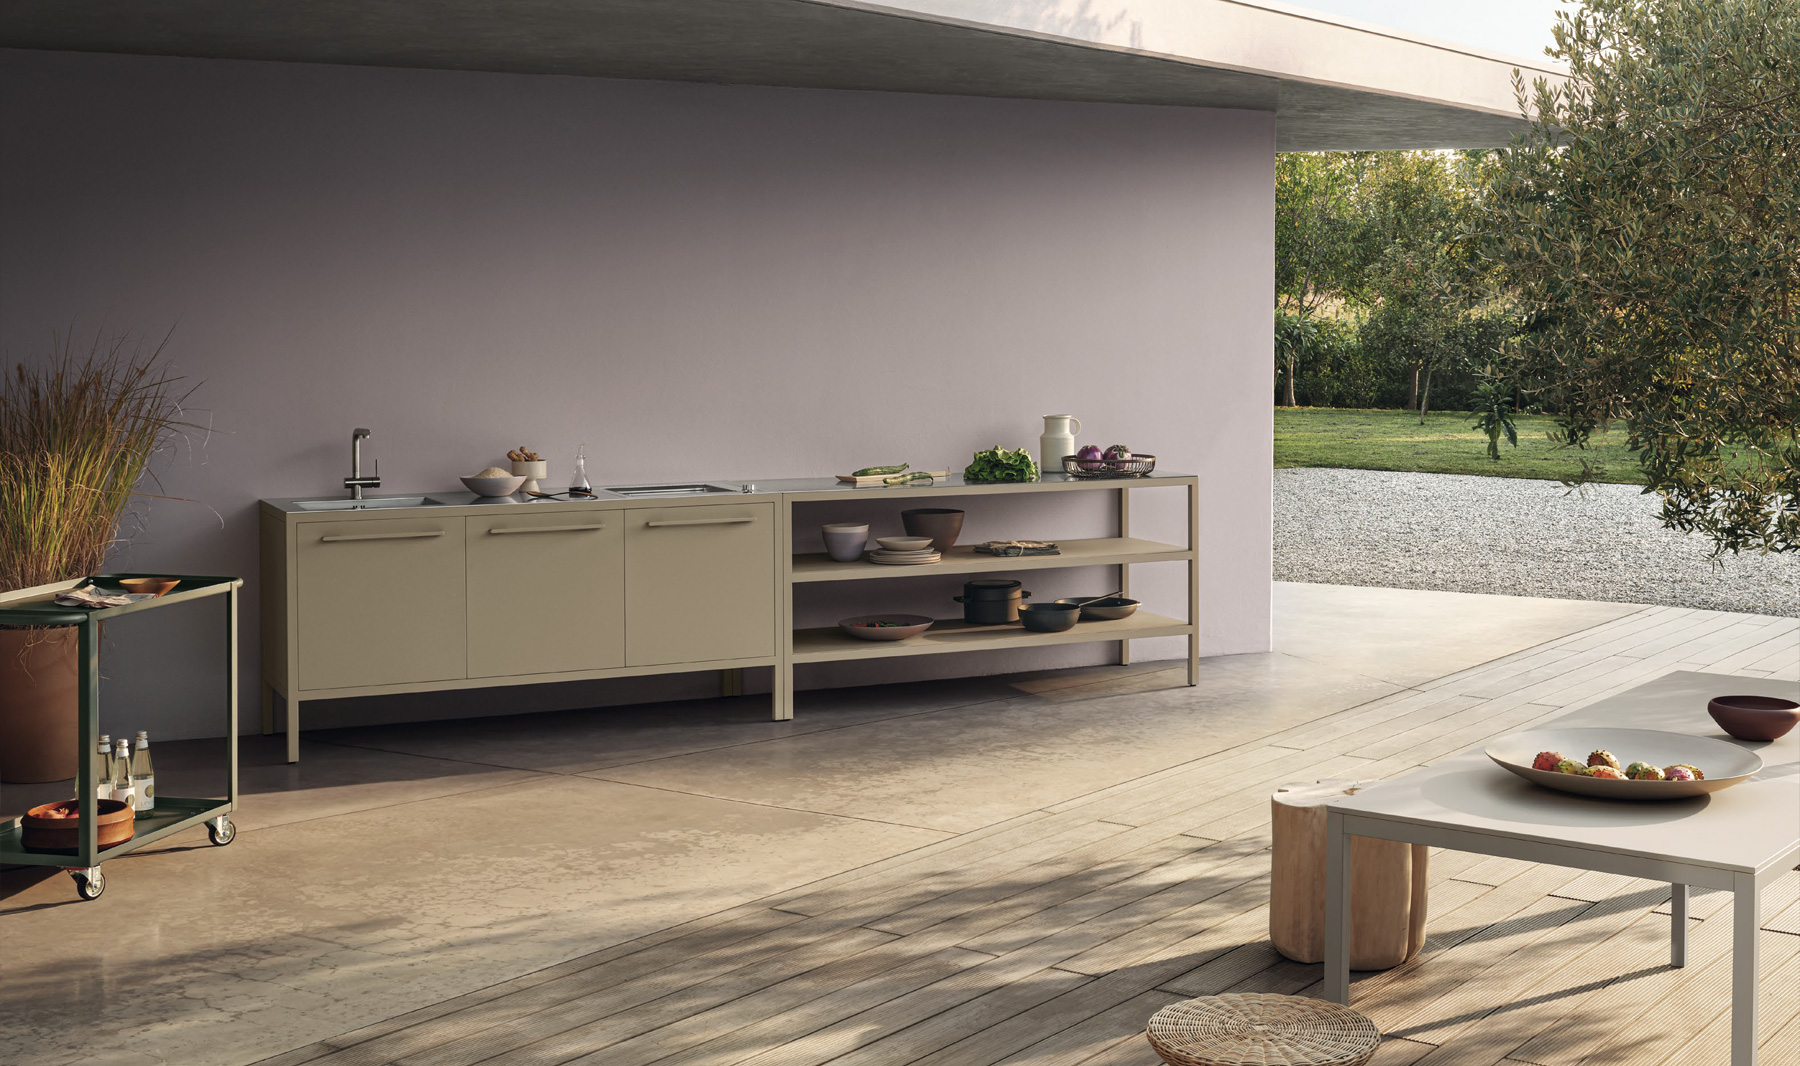 The new outdoor kitchen in powder-coated metal finish